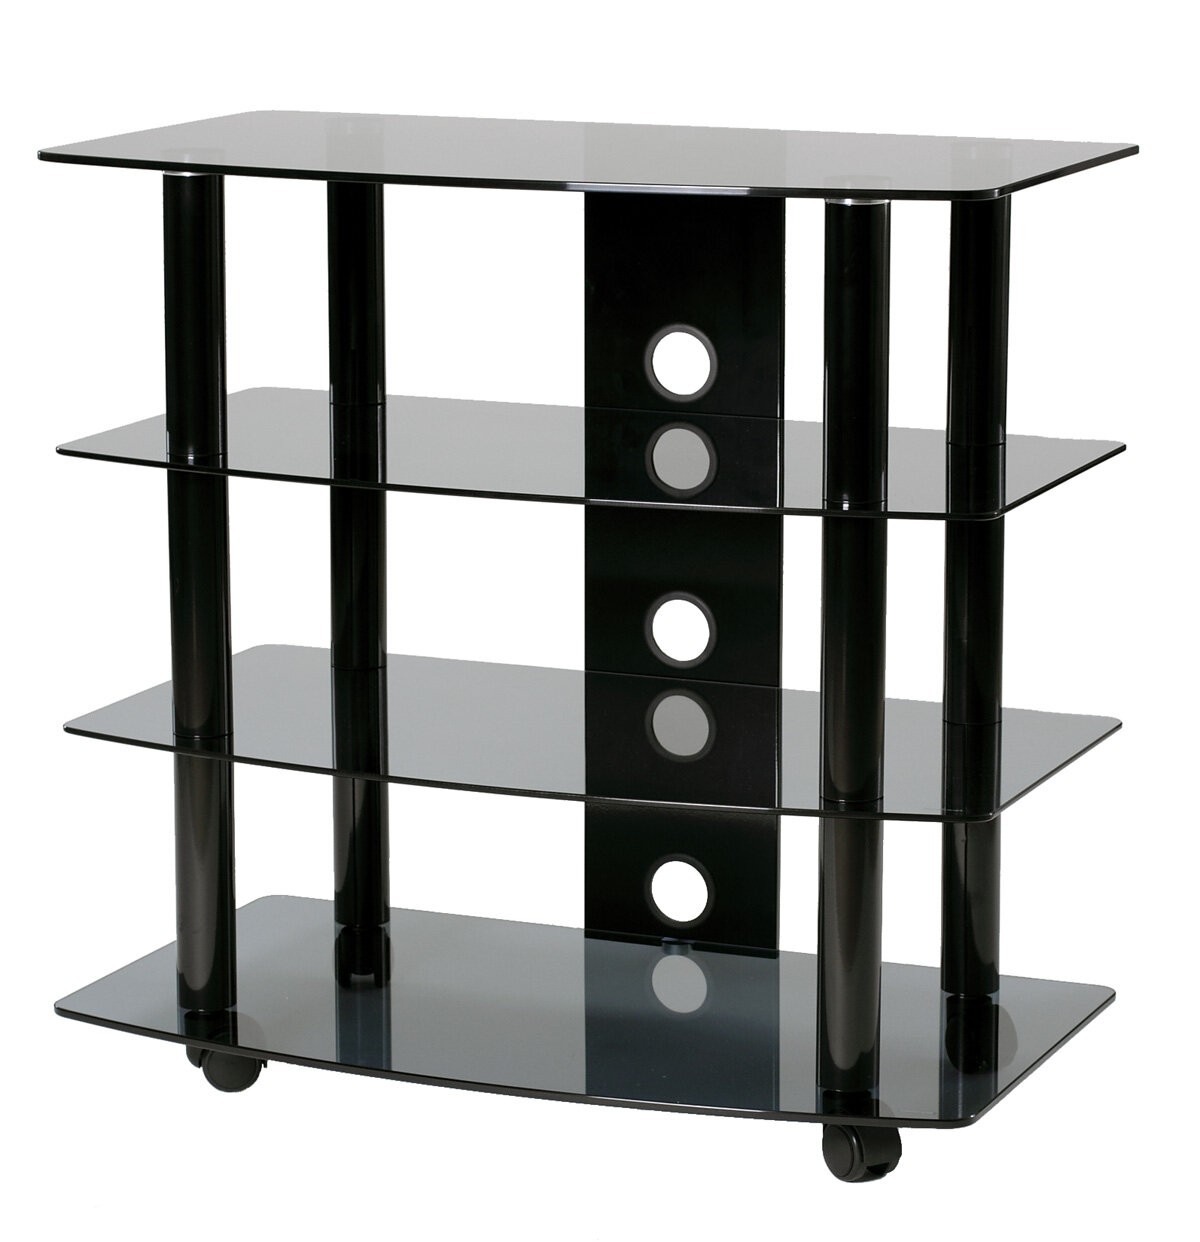 Transdeco black glass and metal tv stand audio rack for